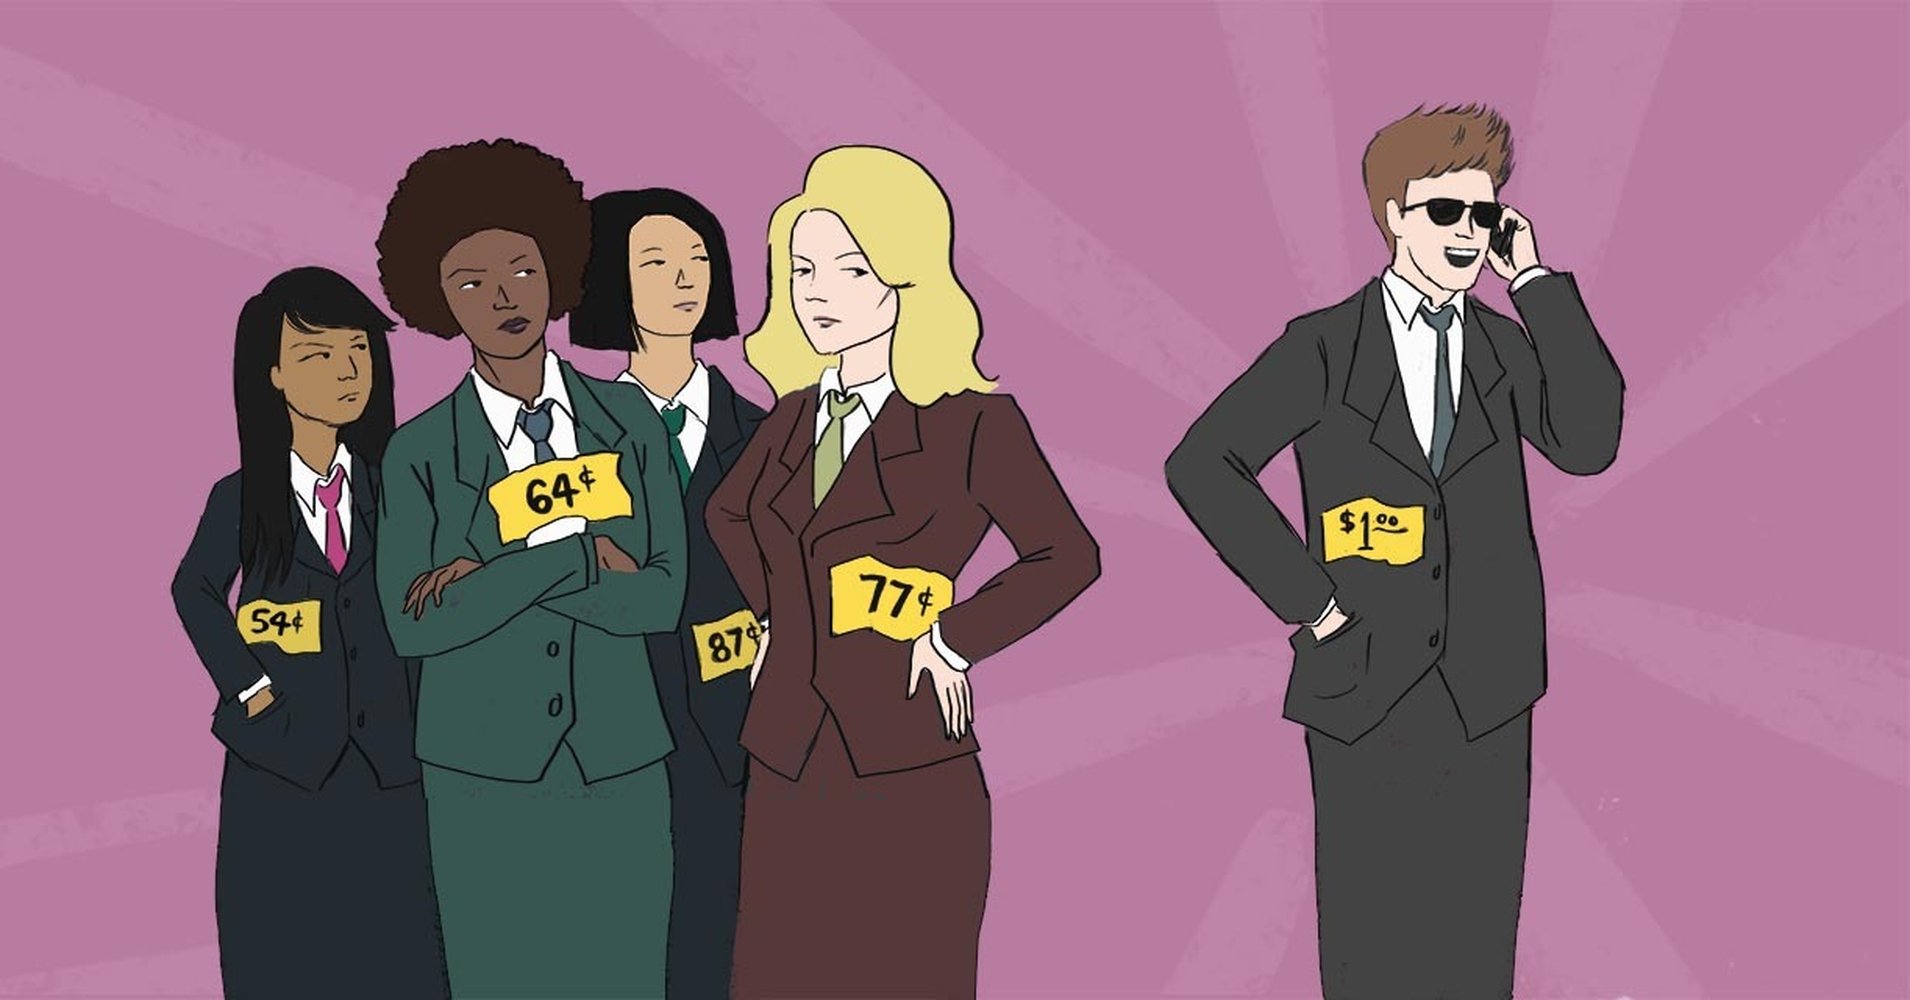 Will the Gender Pay Gap Shrink in the Future?